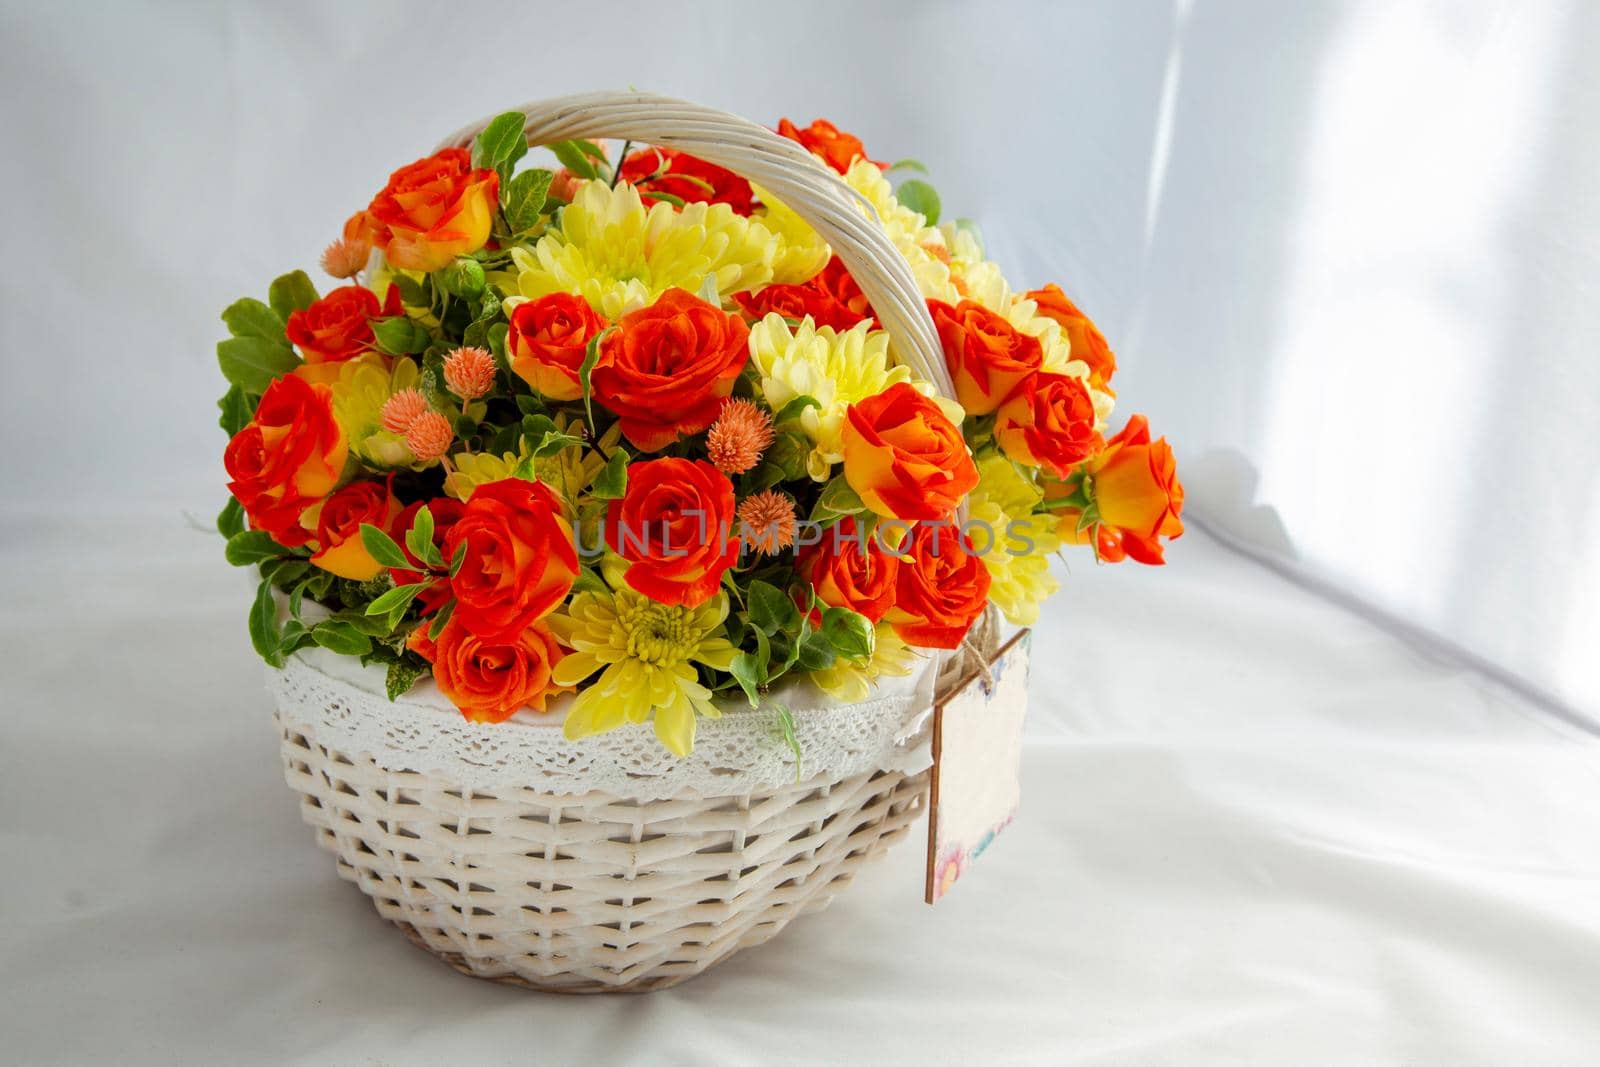 Flowers bunch wicker basket, with red roses and yellow chrysanthemums in gift box. close up, white background